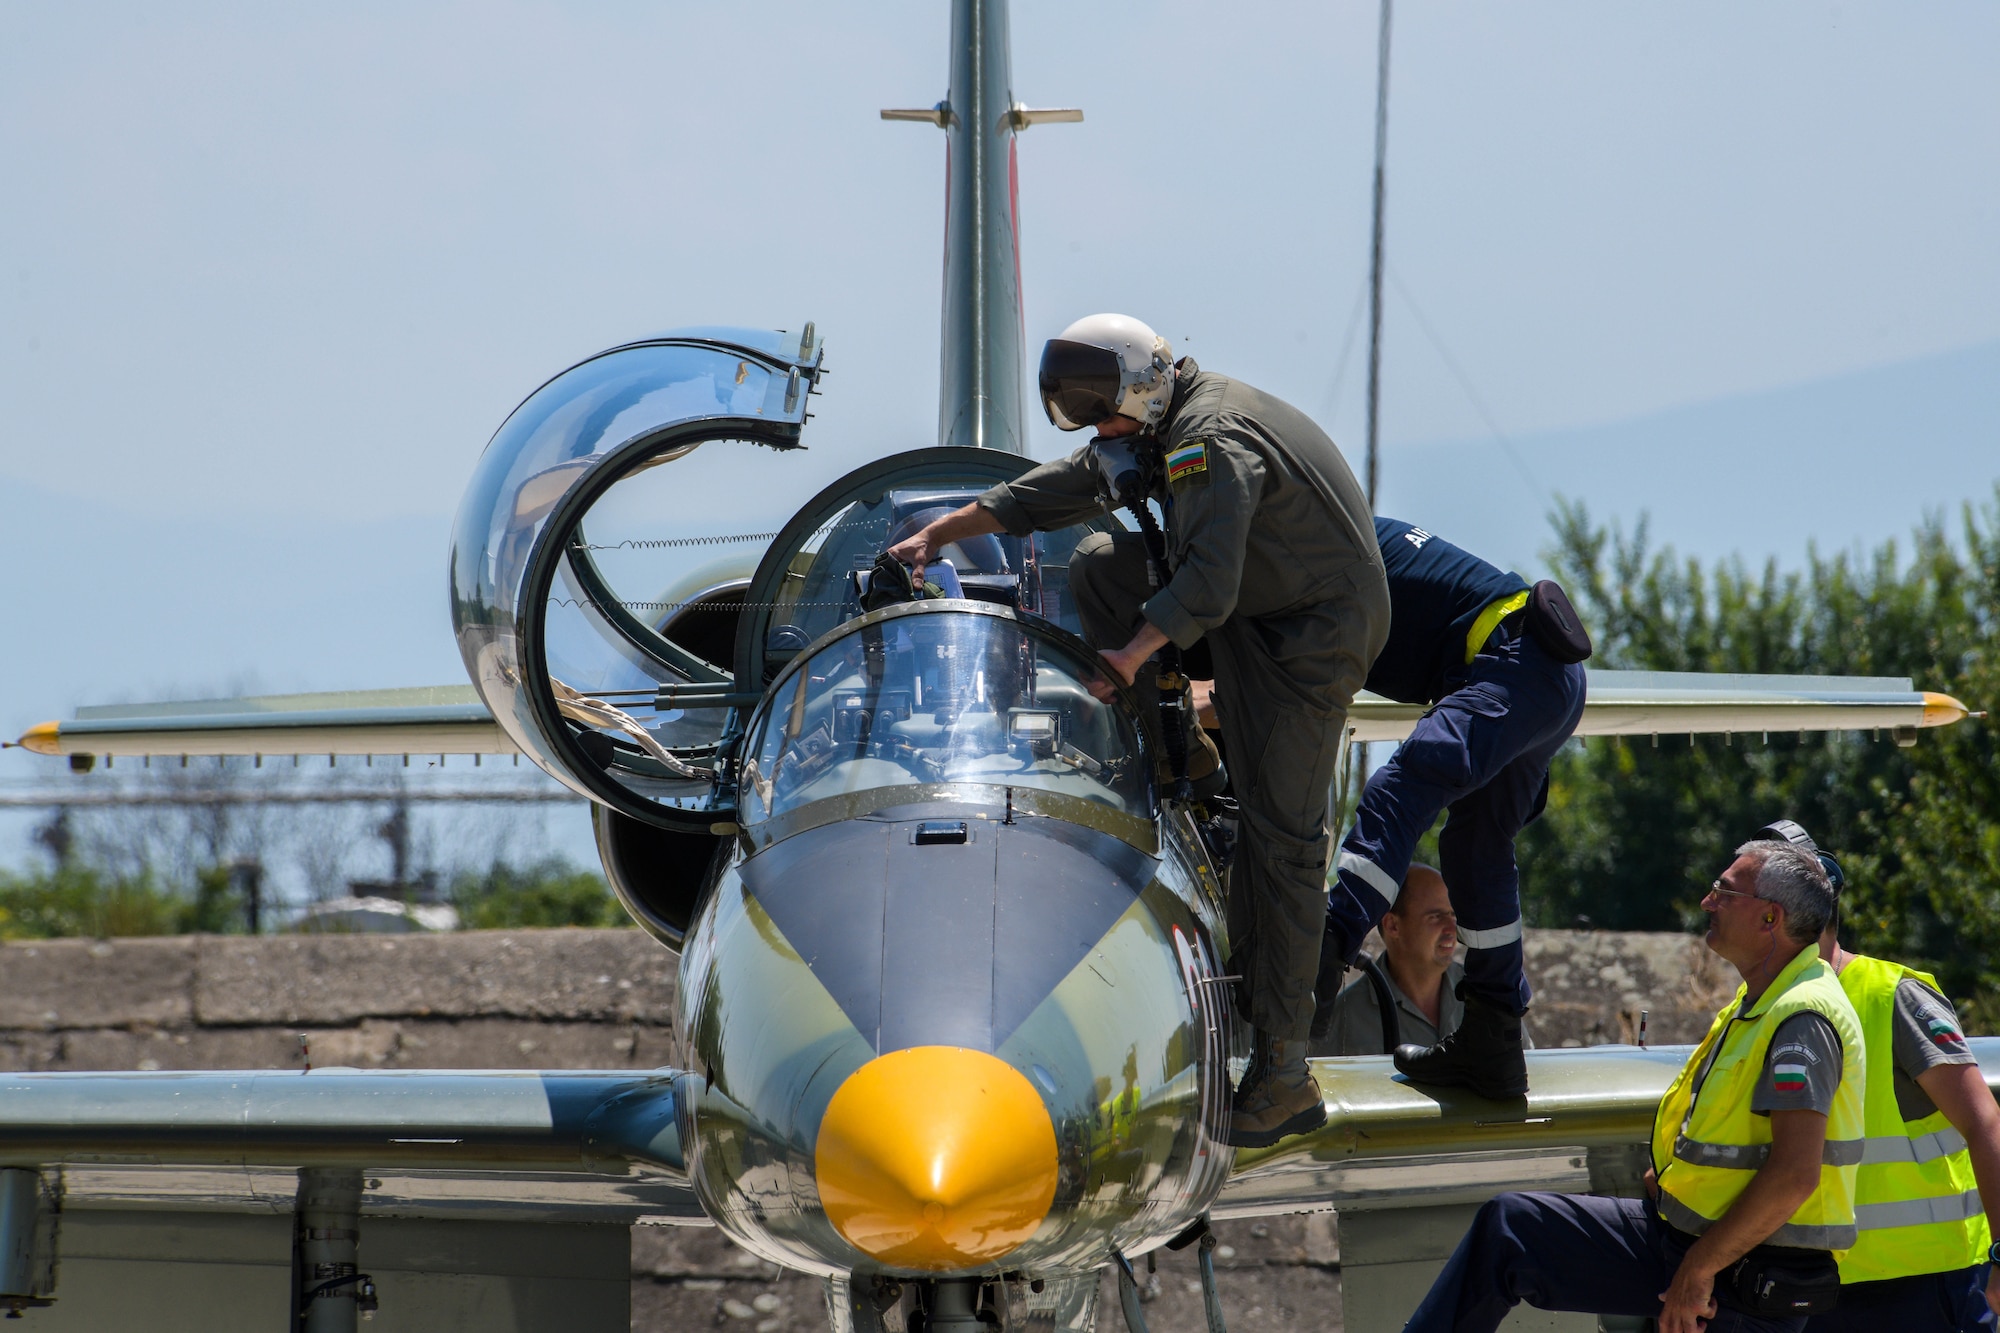 A Bulgarian air force pilot prepares to fly in an Aero L-39 Albatros at Graf Ignatievo Air Base, Bulgaria, July 13, 2021. Successful partnering activities such as Thracian Star 21, a Bulgarian air force-led exercise, result in progressive relationships and lead to tangible, mutual benefits during peacetime, contingencies and crisis, through actions such as regional security, access and coalition operations. (U.S. Air Force photo by Airman 1st Class Brooke Moeder)